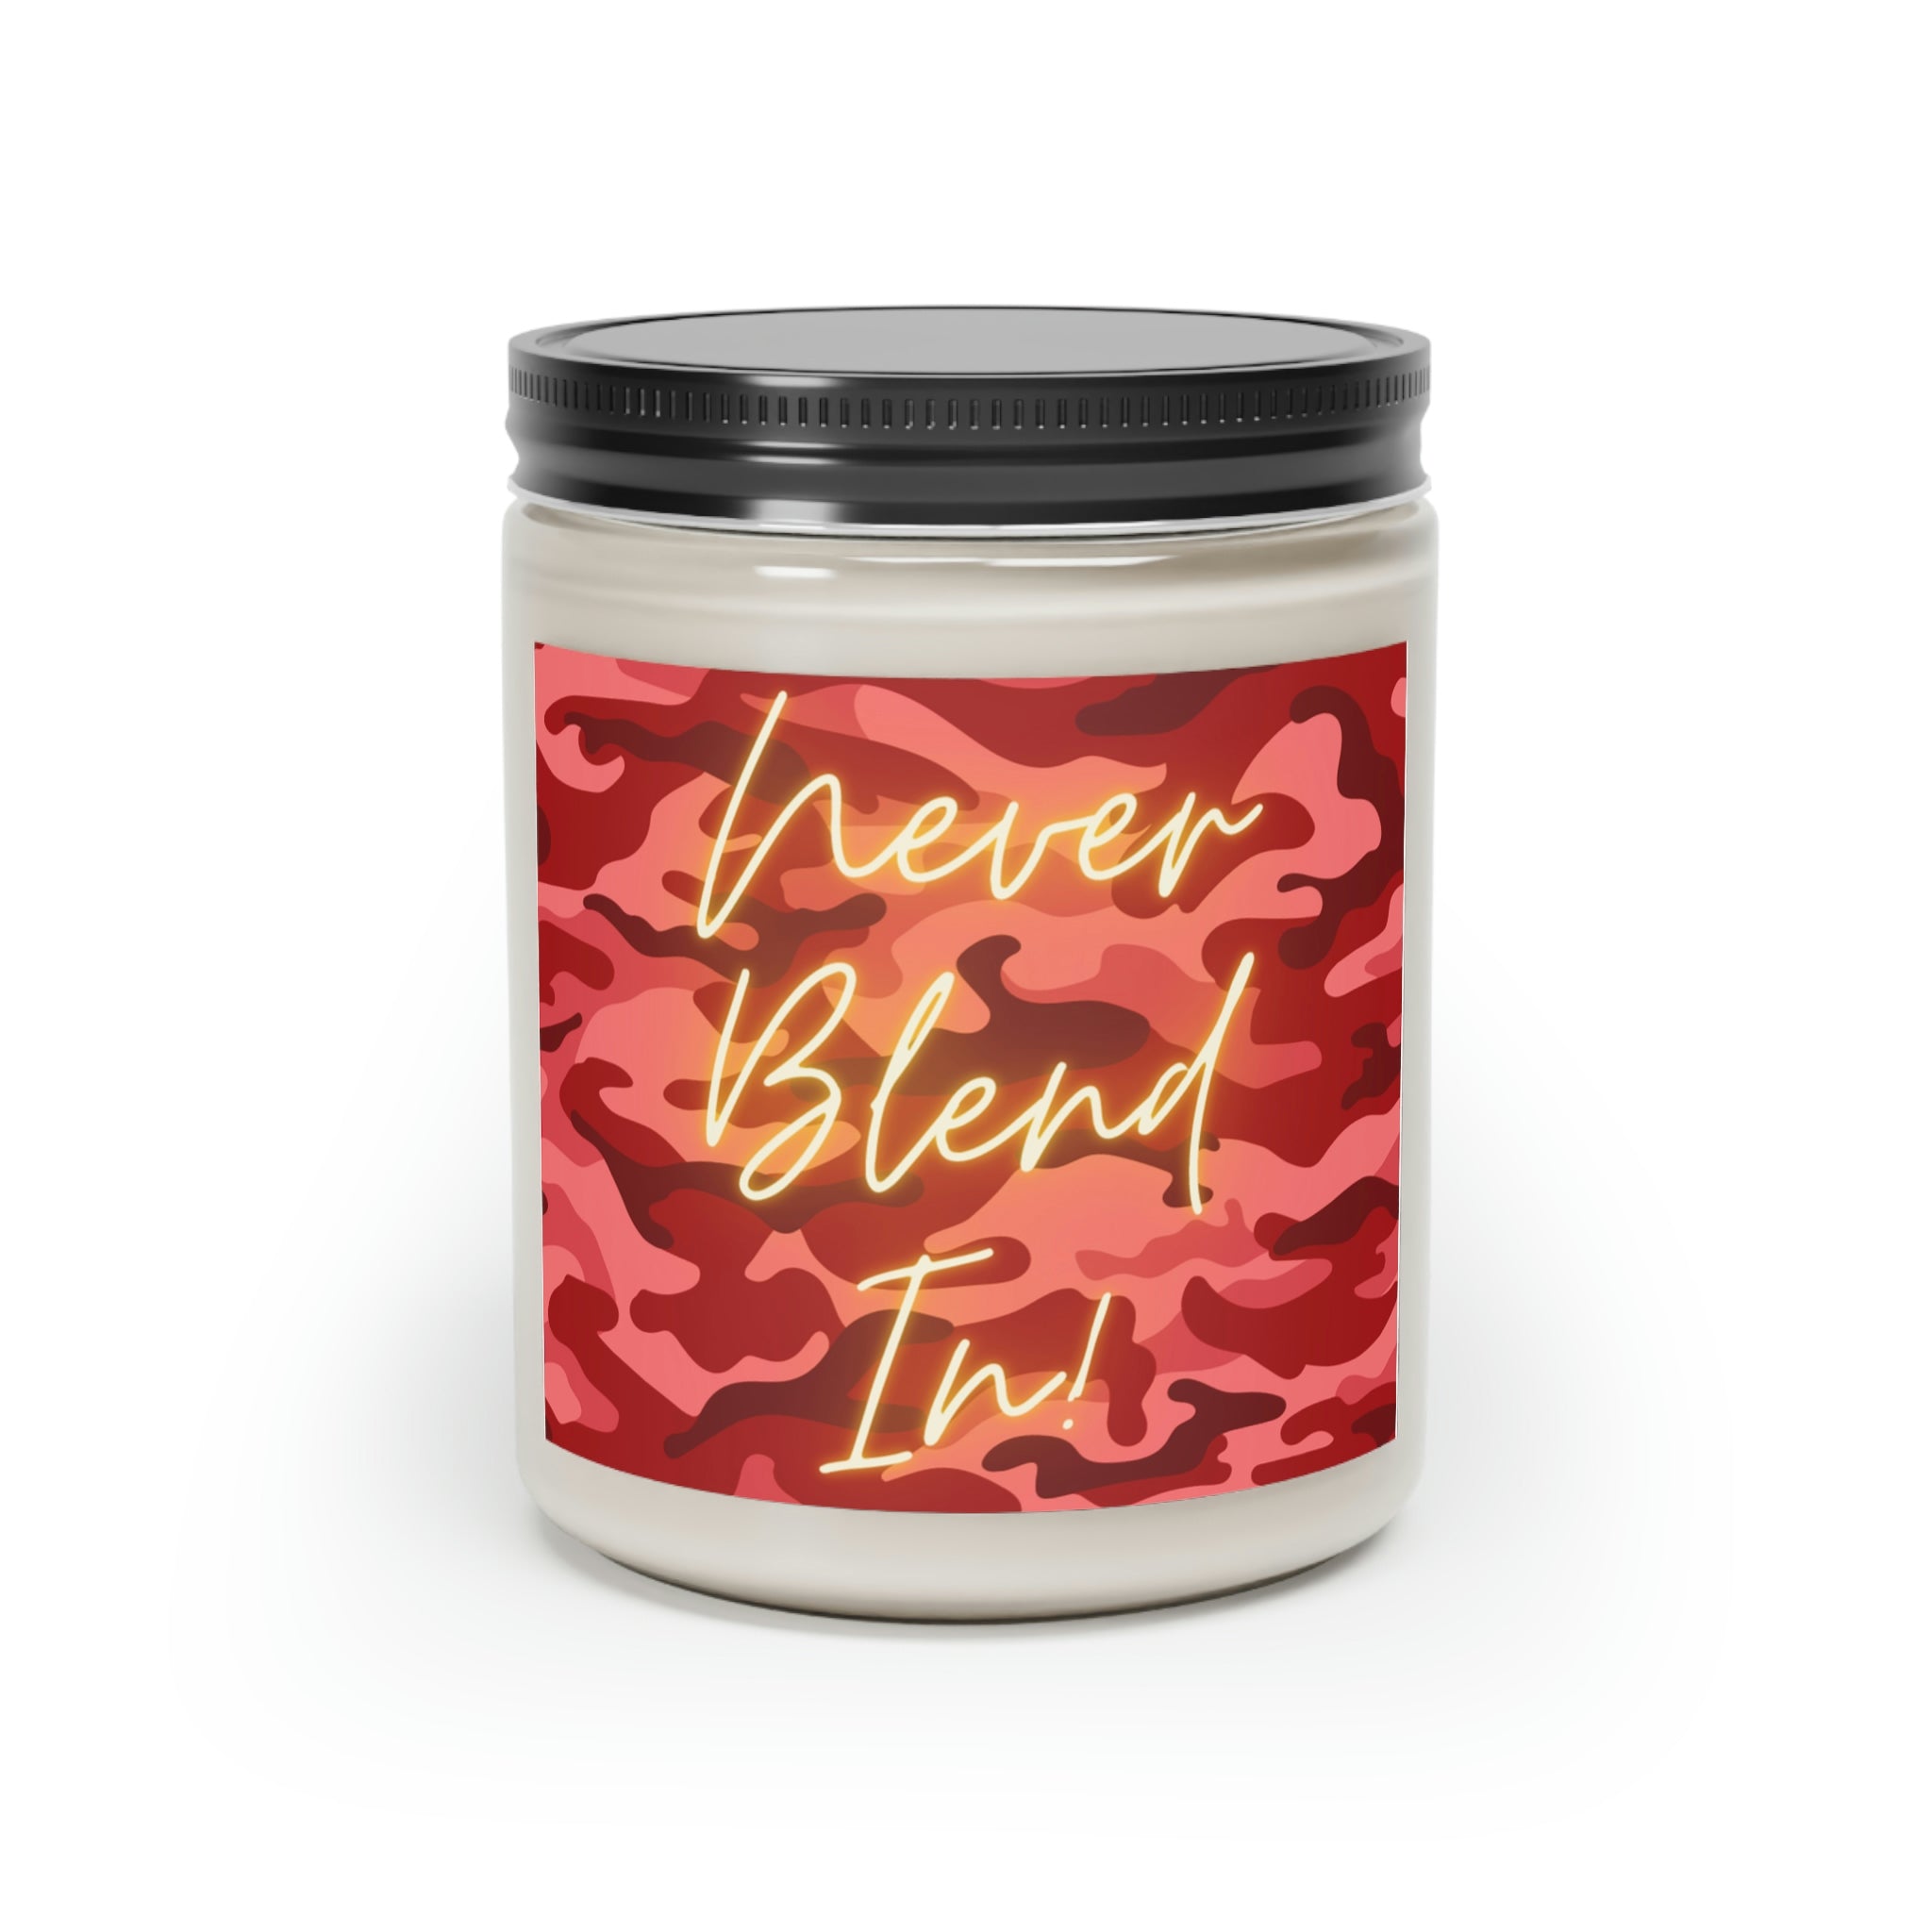 Never Blend In! - Scented Soy Candle - 50 hour